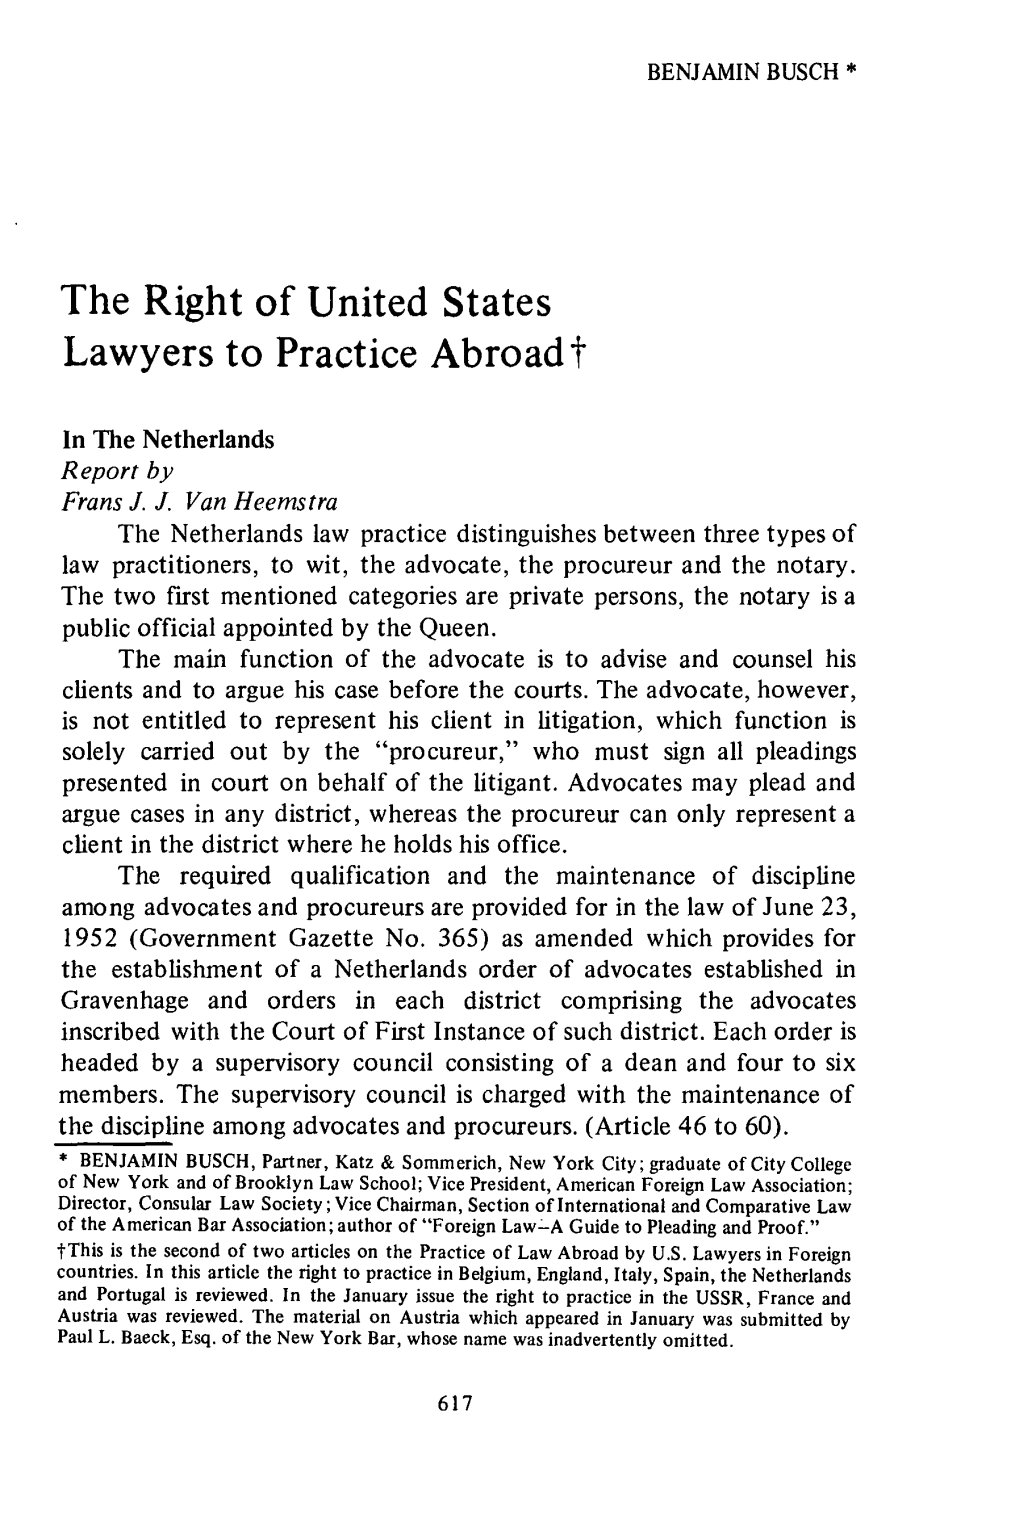 The Right of United States Lawyers to Practice Abroad T